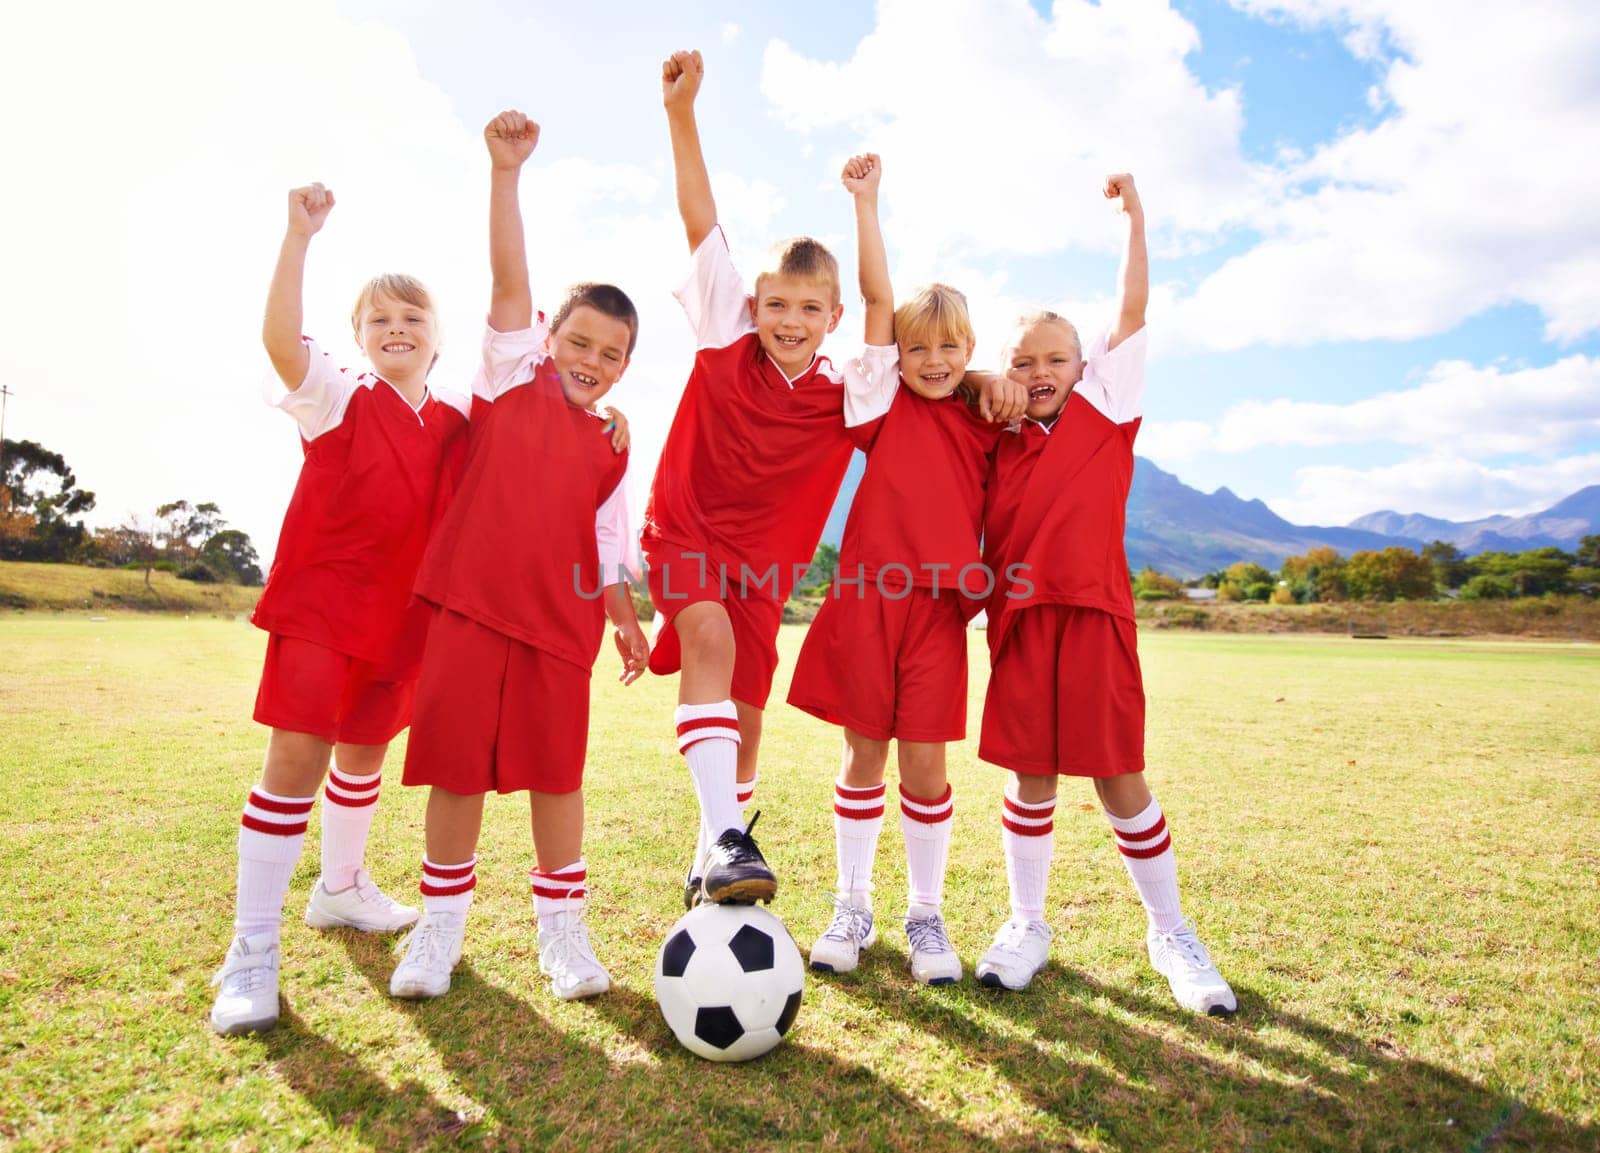 Children, soccer team and celebration for winning or success, happy and victory in outdoors. People, kids and fist pump for achievement, collaboration and partnership or teamwork on field or sport.